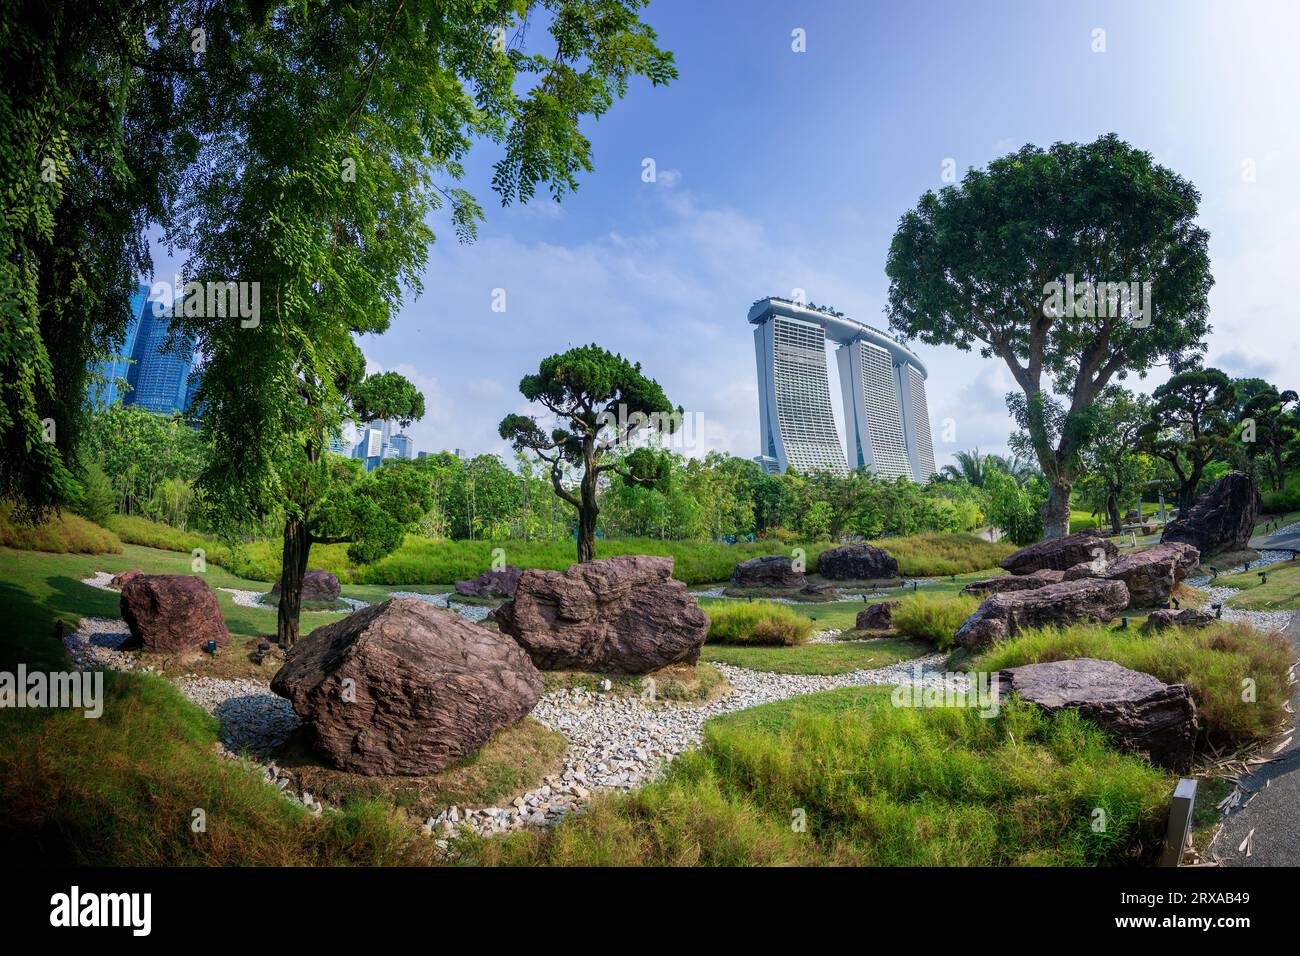 Serene Garden inspired by the concept of Japanese Zen gardens with iconic Marina Bay Sands building in background. Gardens by the Bay, Singapore Stock Photo